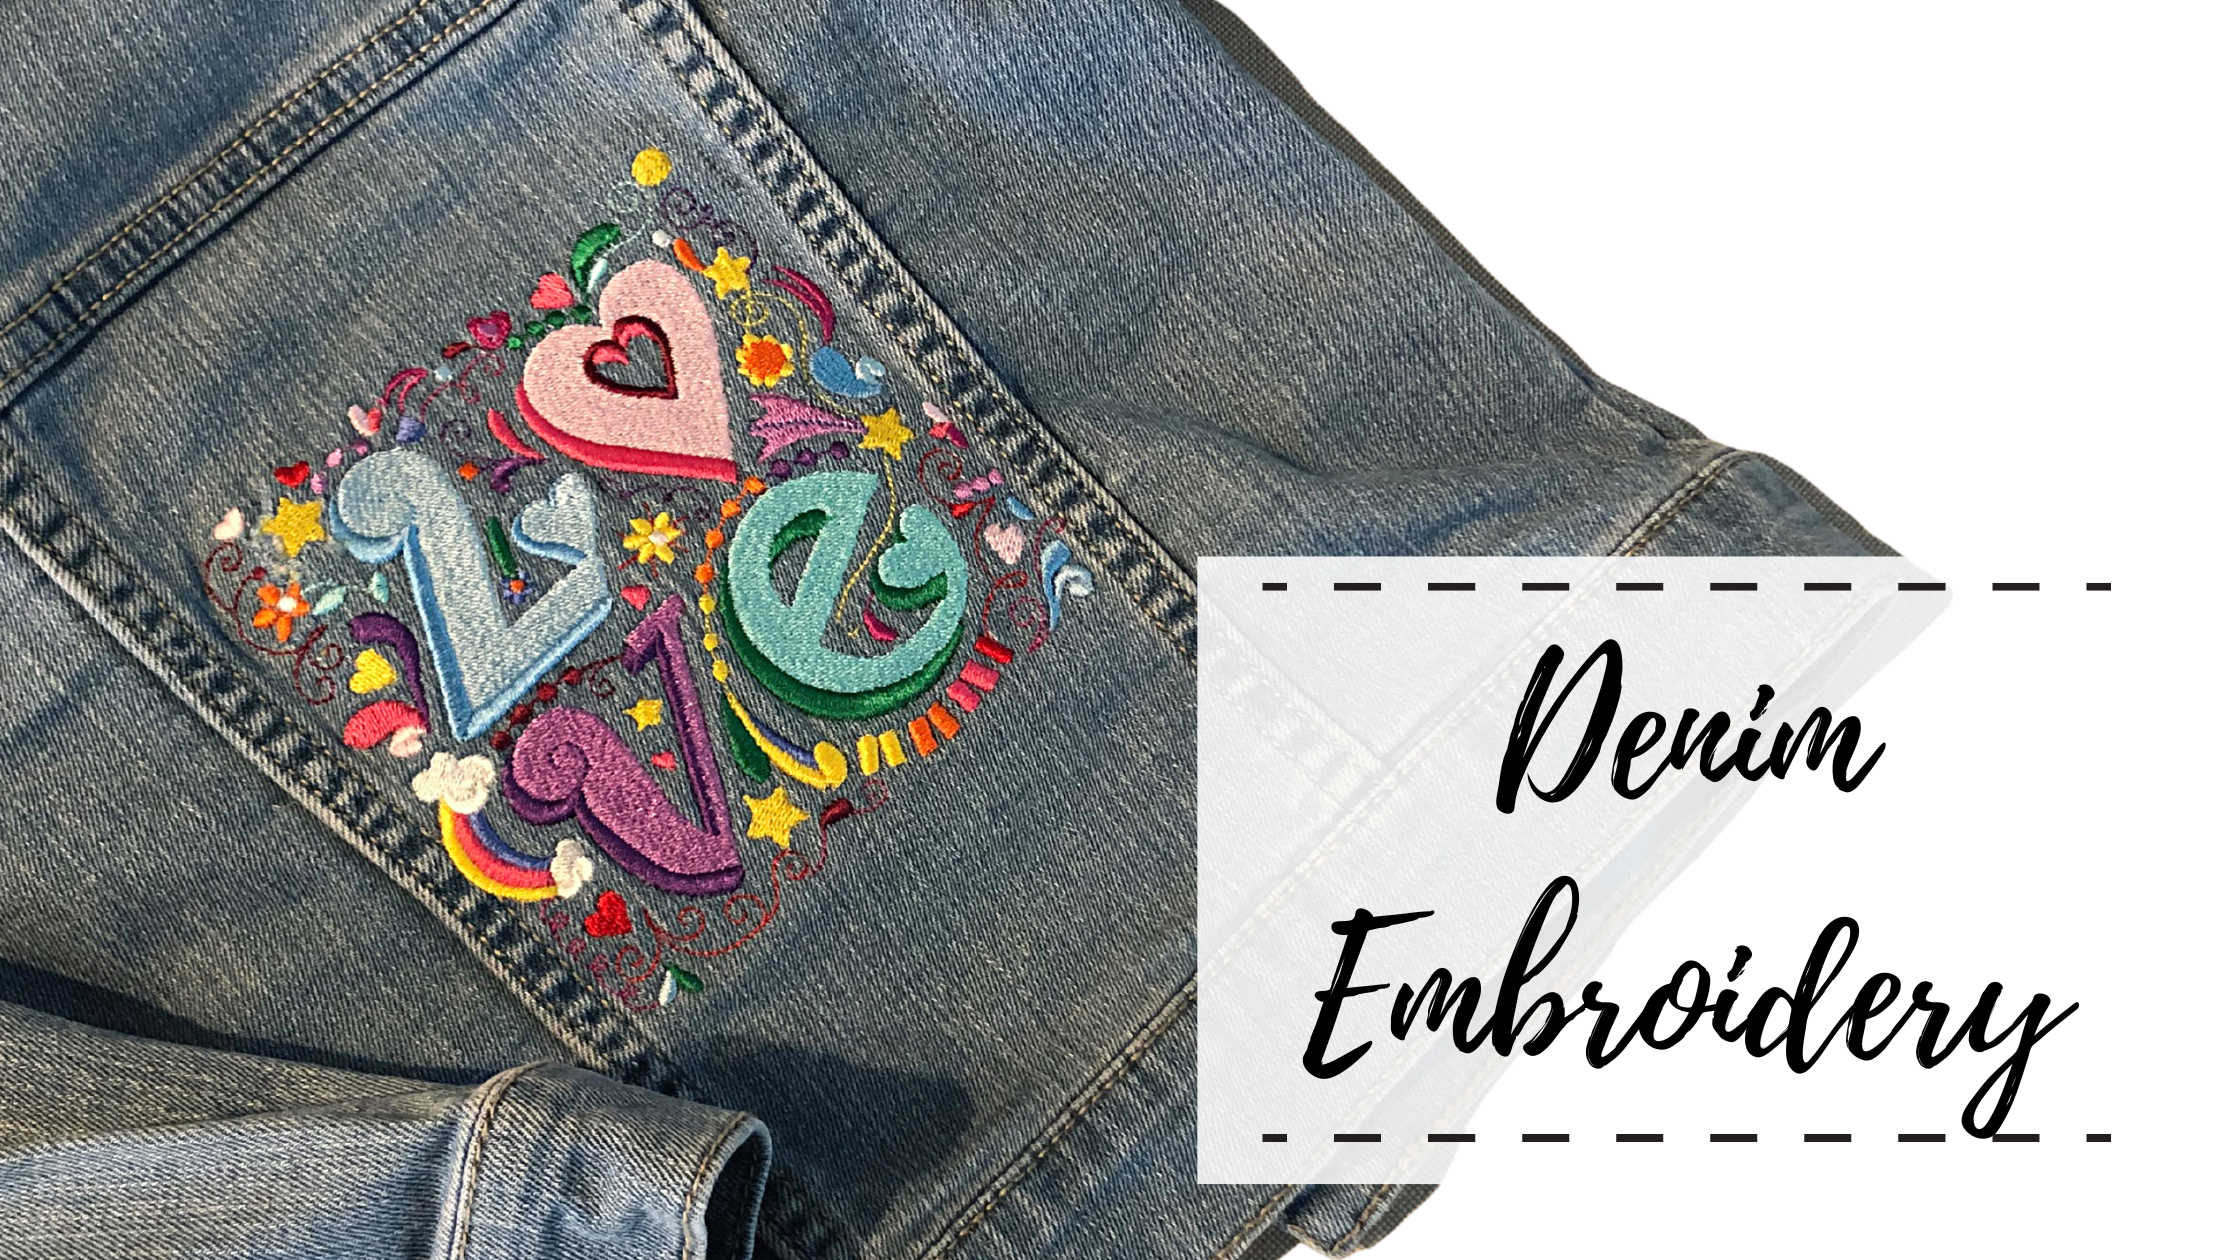 HOW TO EMBROIDER A JEAN JACKET  DIY MONOGRAM JEAN JACKET 